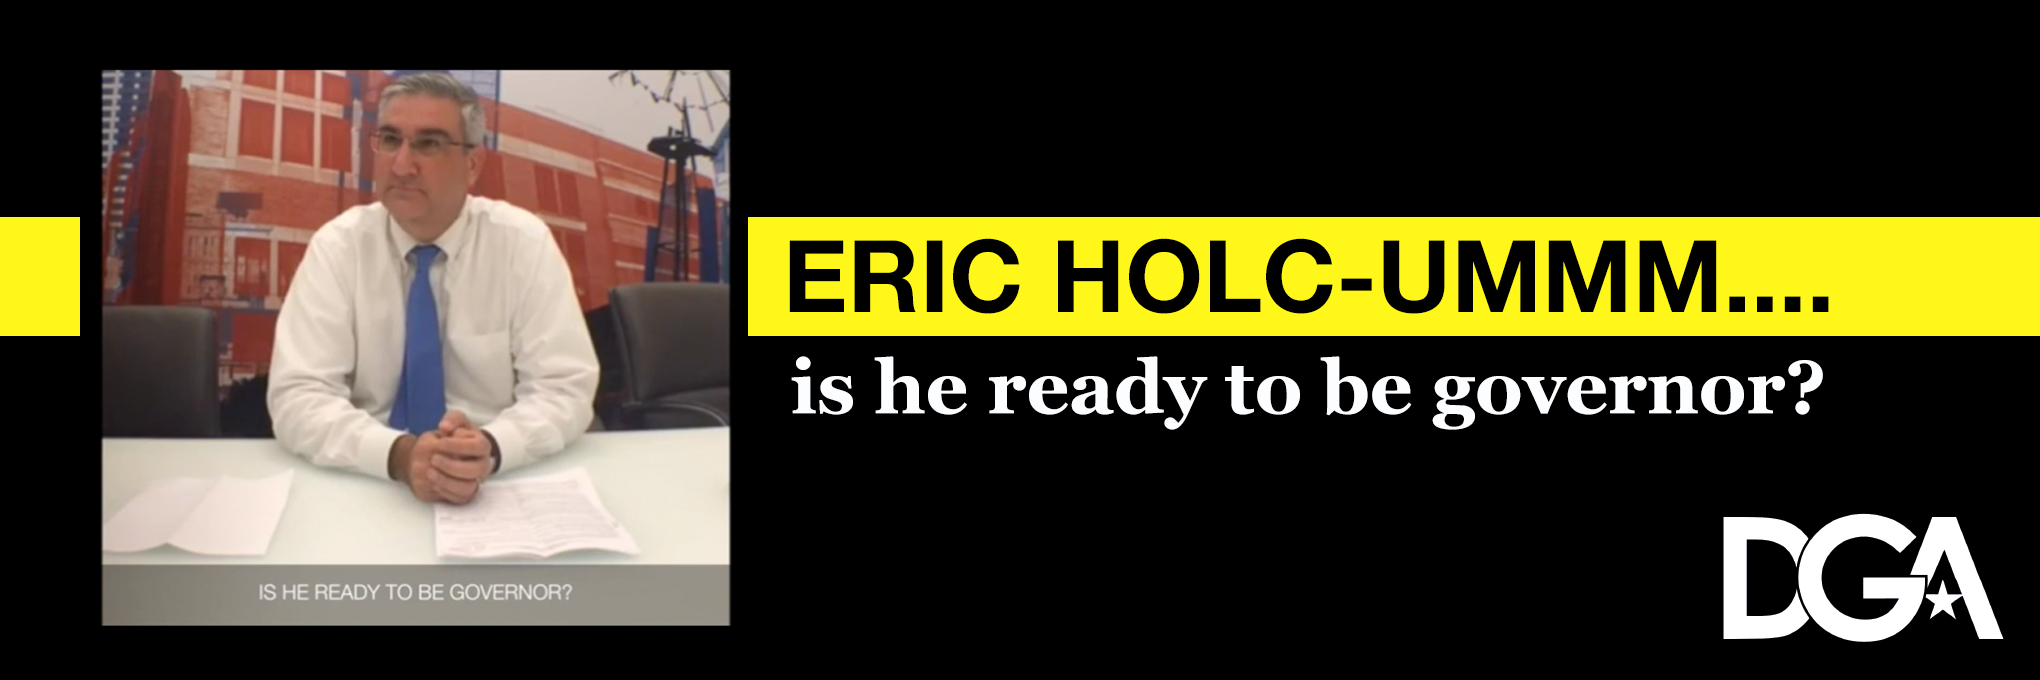 New DGA Video: 'Eric Holc-Ummm…'. Painful video shows Pence's replacement…  | by Democratic Governors | Medium